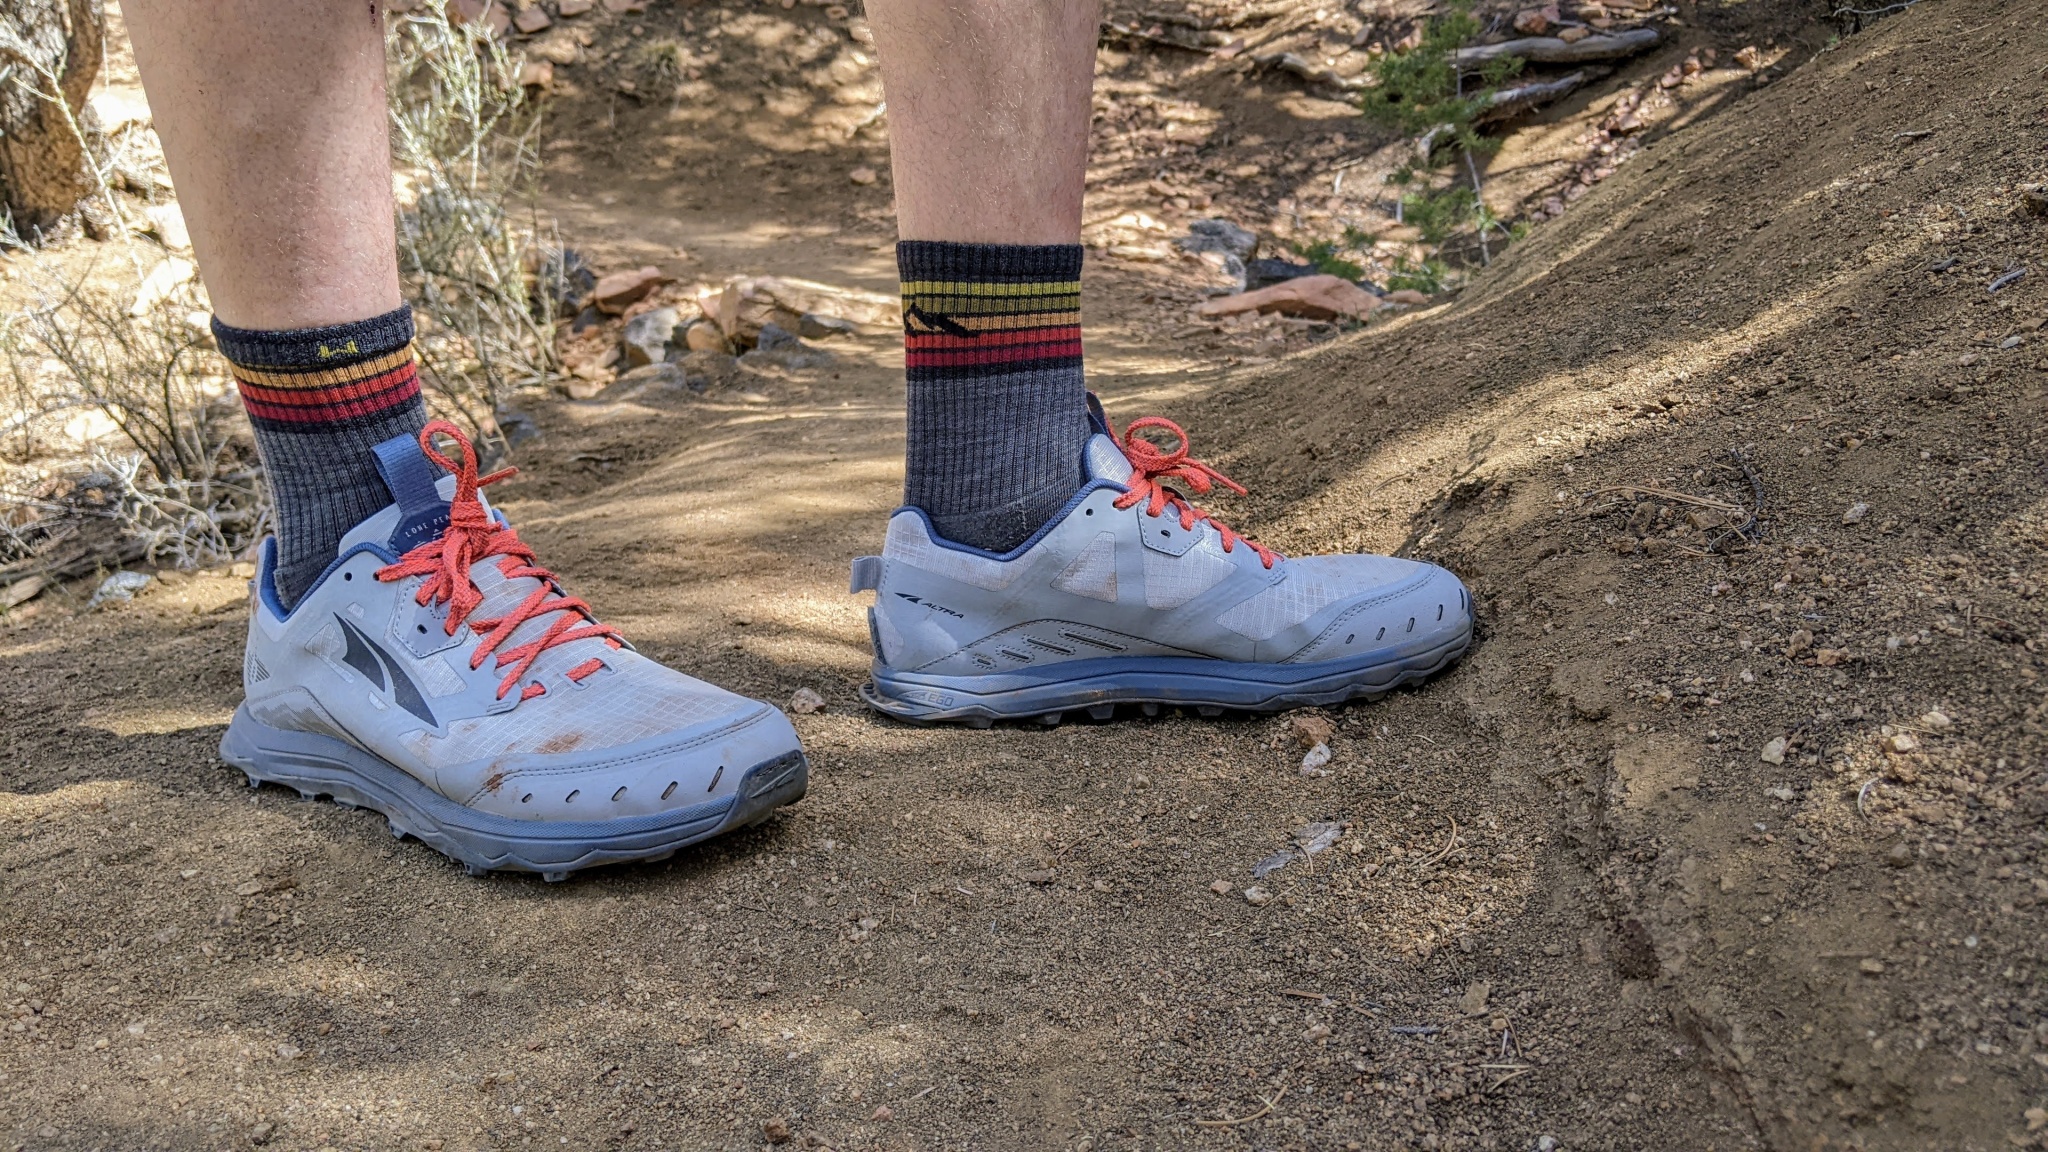 Altra Lone Peak 6 Review | Tested & Rated